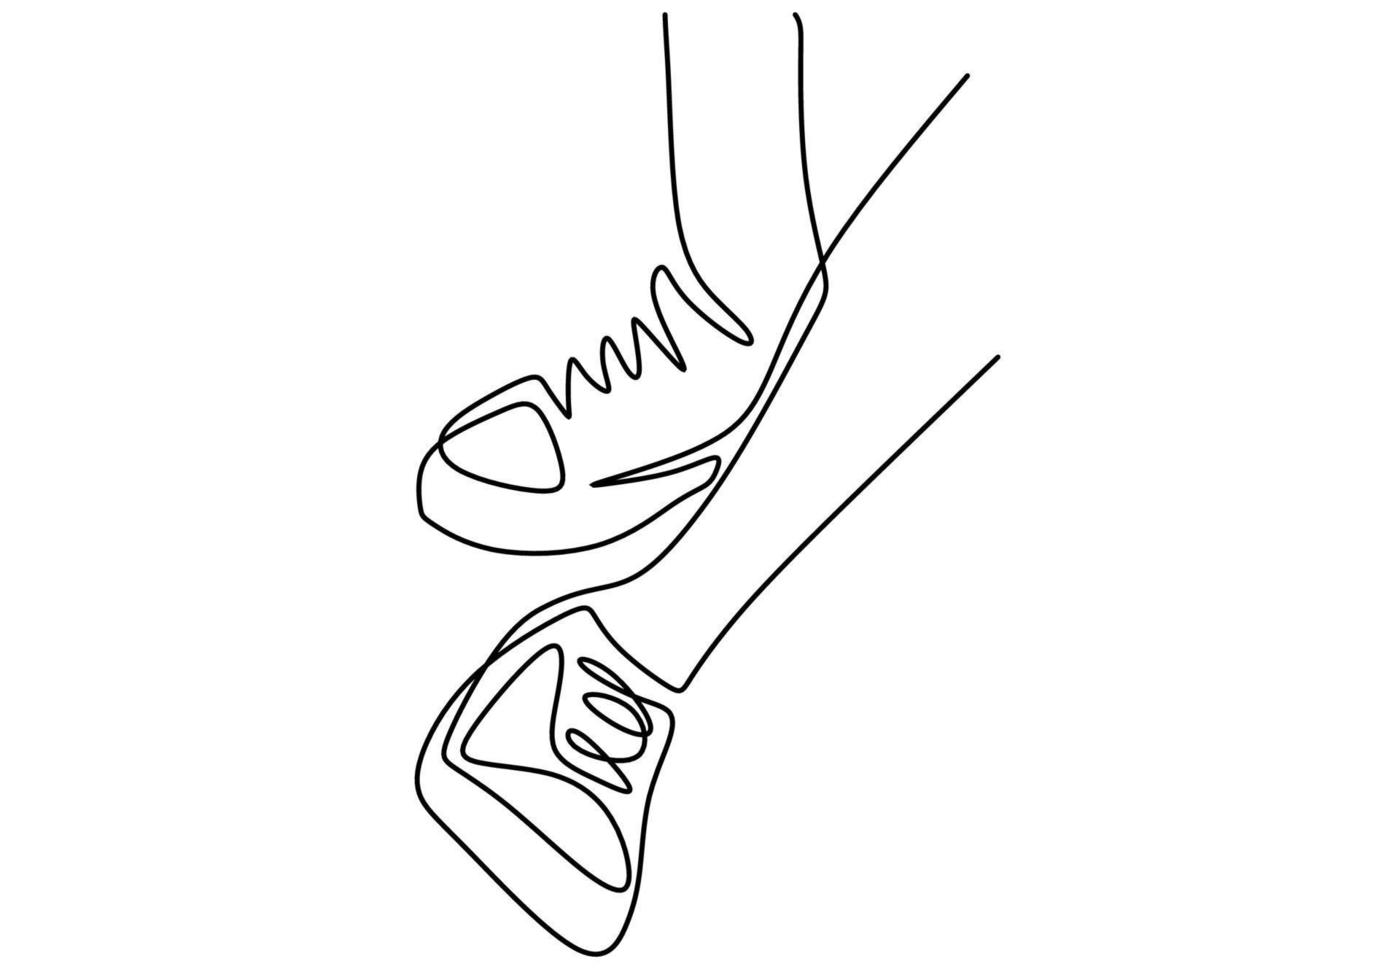 One line drawing of foot and shoes isolated on white background. vector